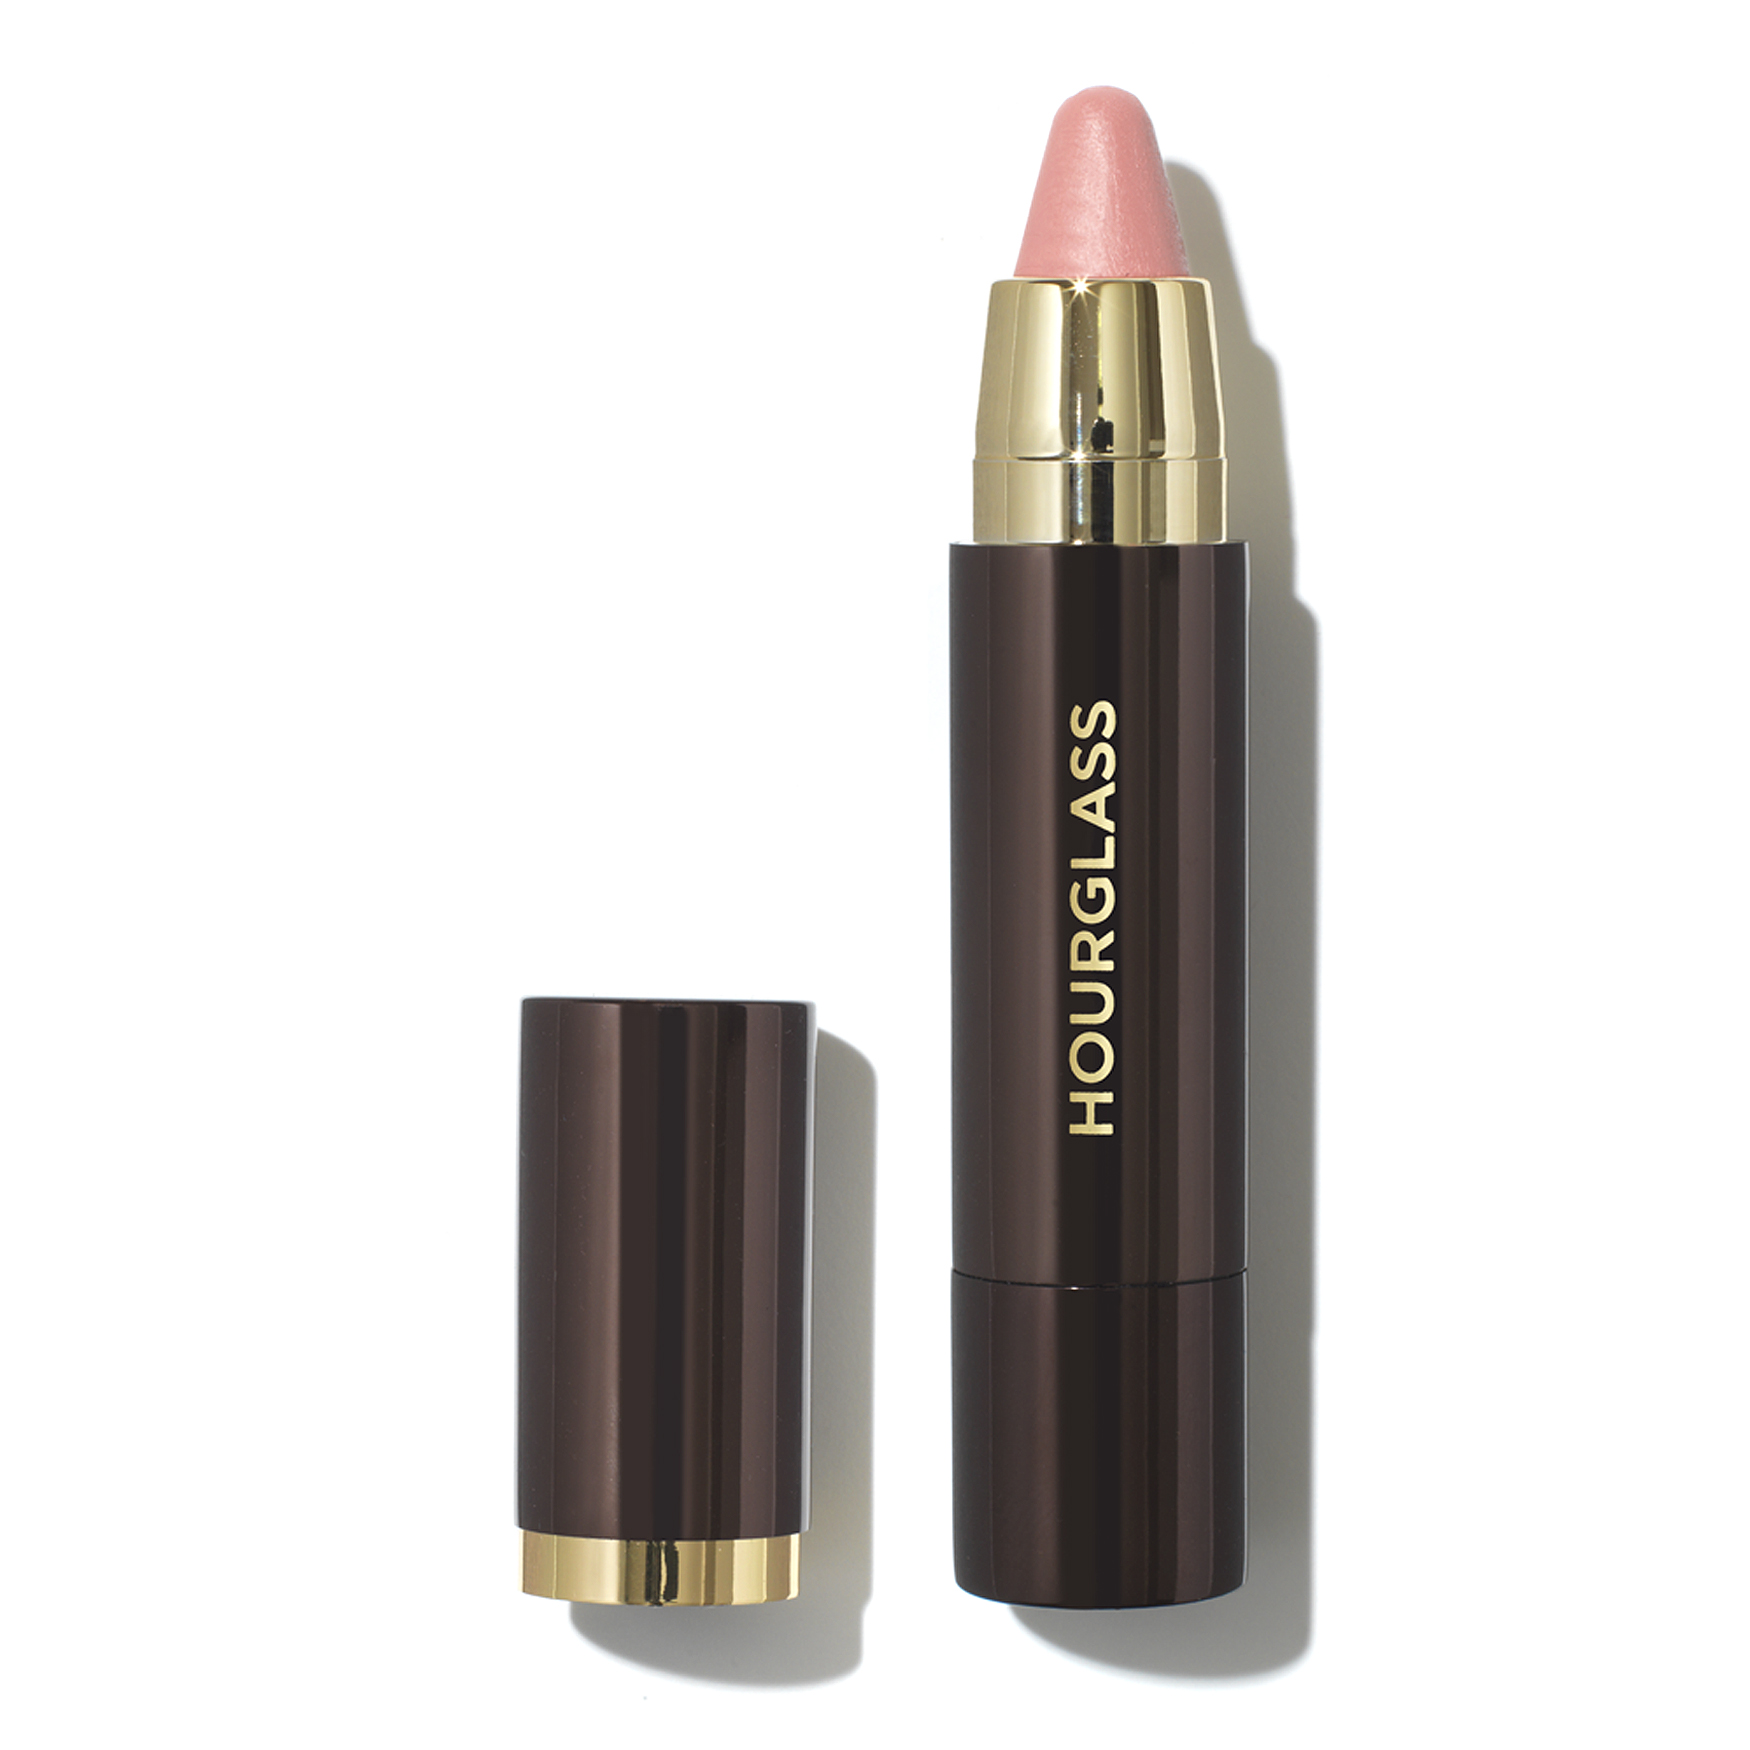 Hourglass Femme Nude Lip Stylo | Space NK